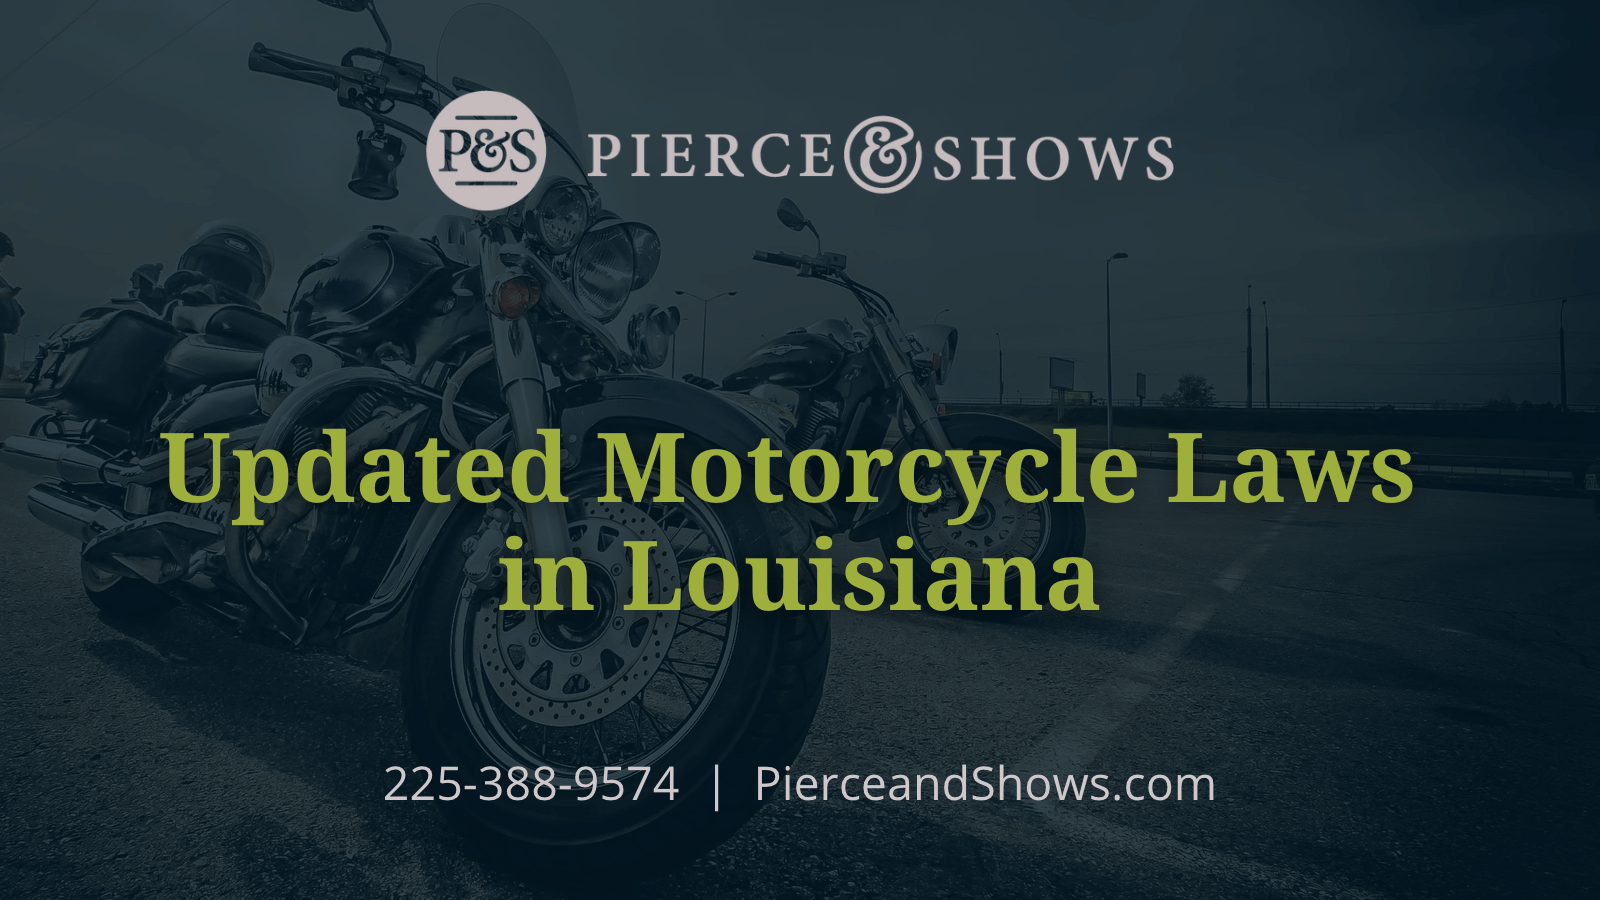 Updated Motorcycle Laws in Louisiana - Baton Rouge Louisiana injury attorney Pierce & Shows